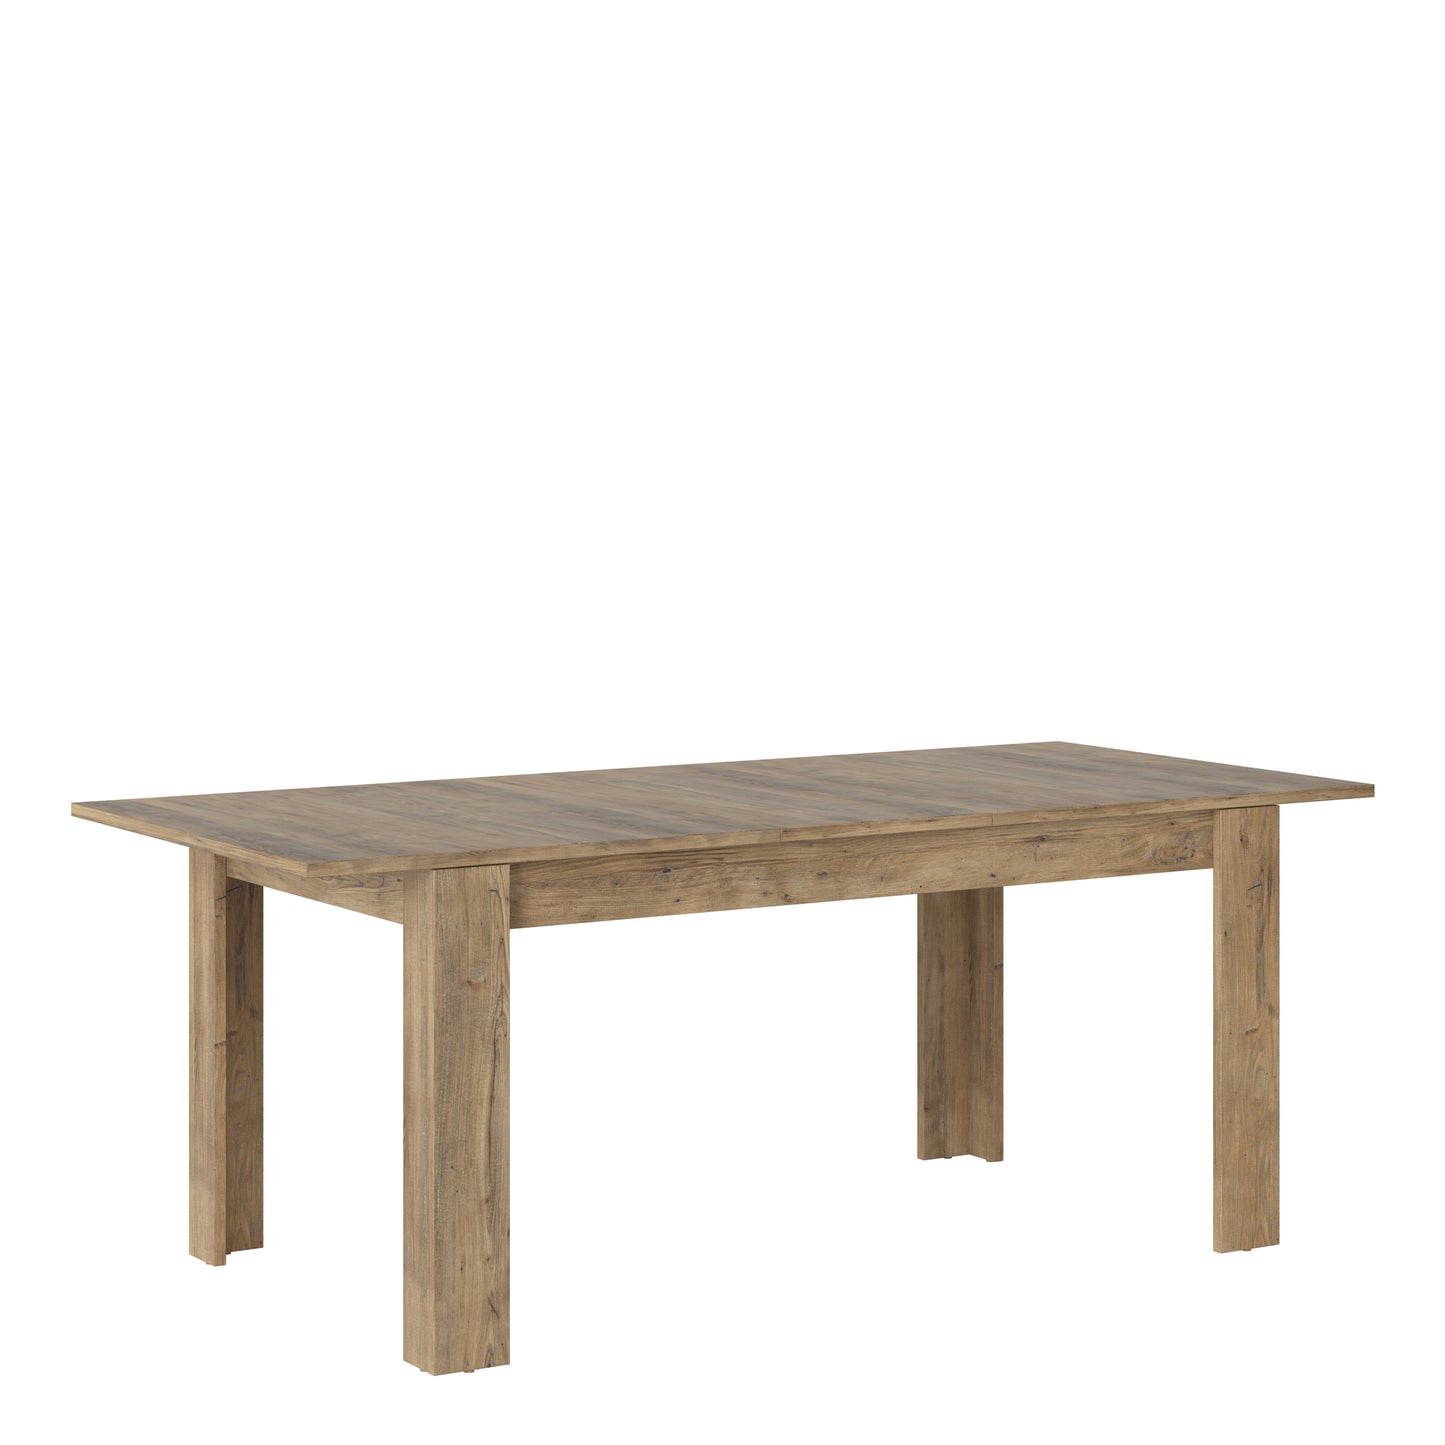 Rapallo  extending dining table 160-200cm in Chestnut and Matera Grey